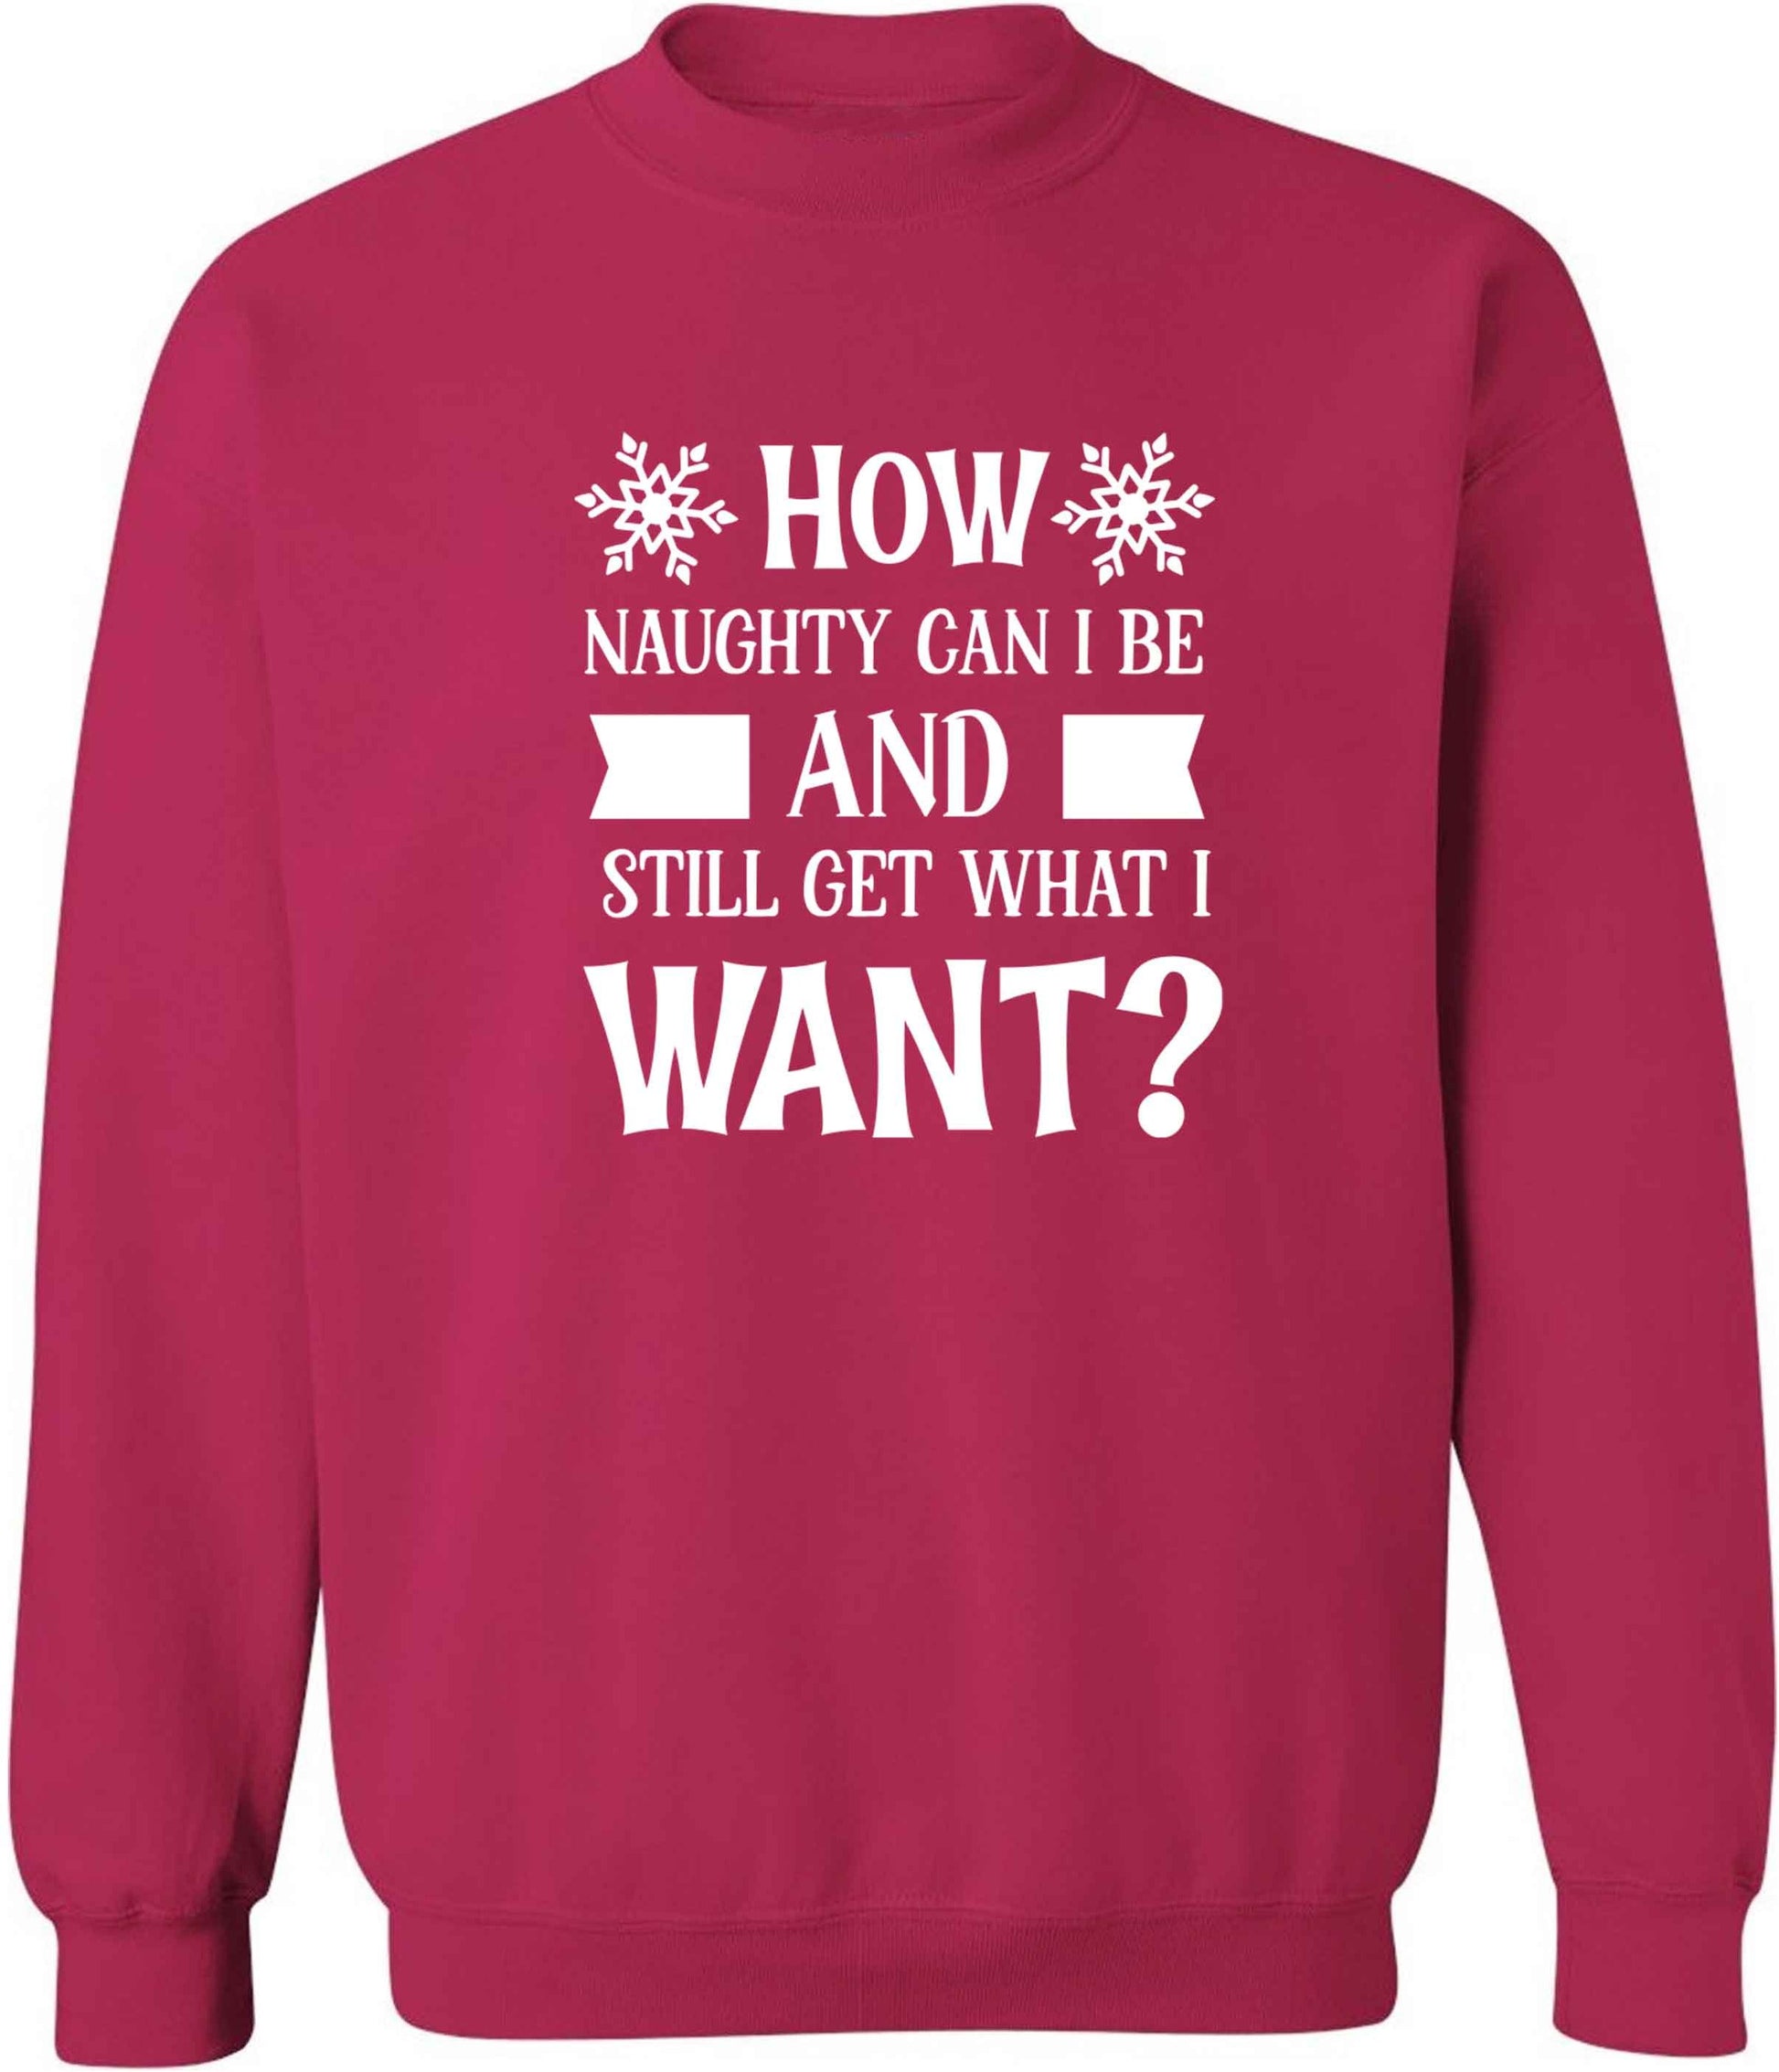 How naughty can I be and still get what I want? adult's unisex pink sweater 2XL